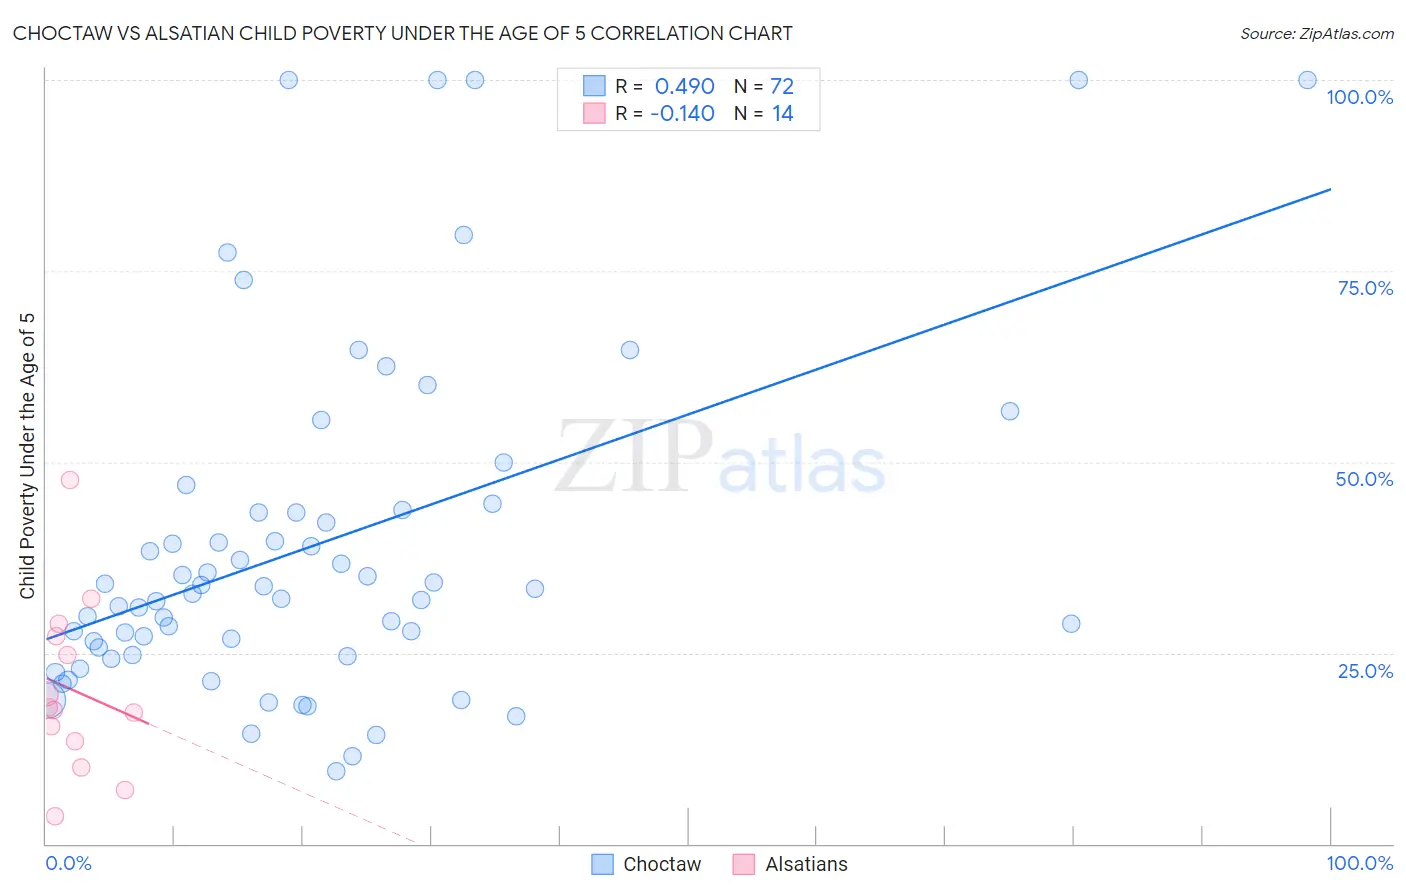 Choctaw vs Alsatian Child Poverty Under the Age of 5